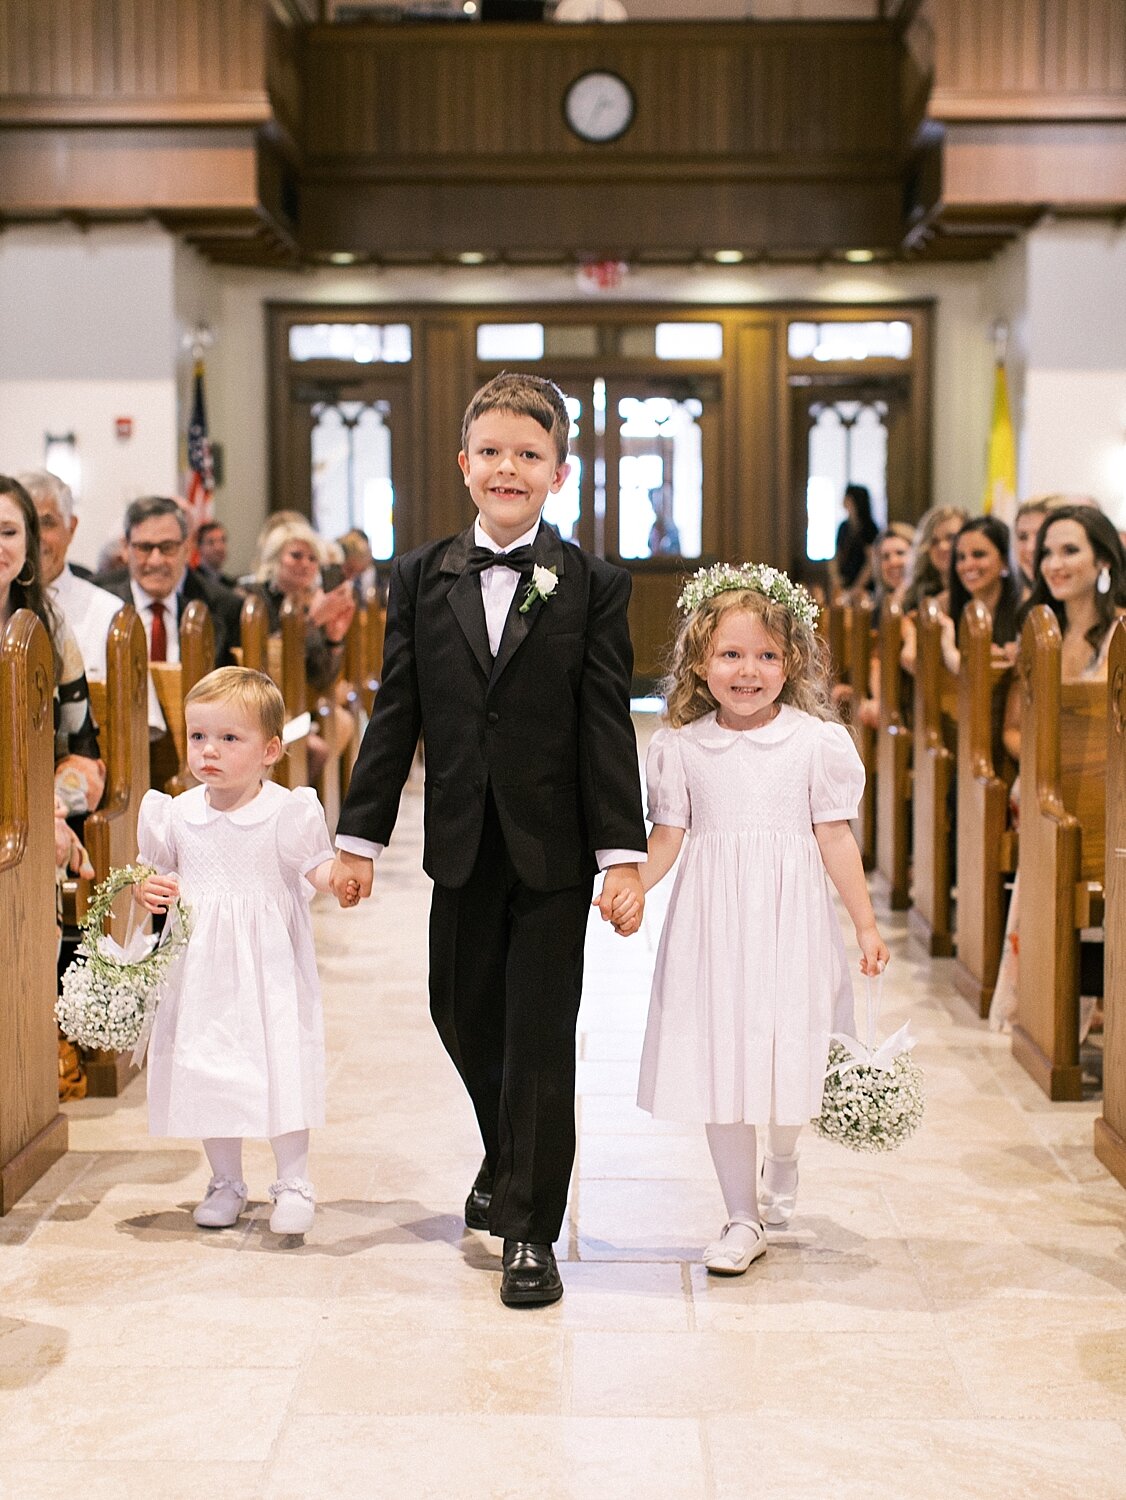 children enter church ceremony photographed by Asher Gardner Photography